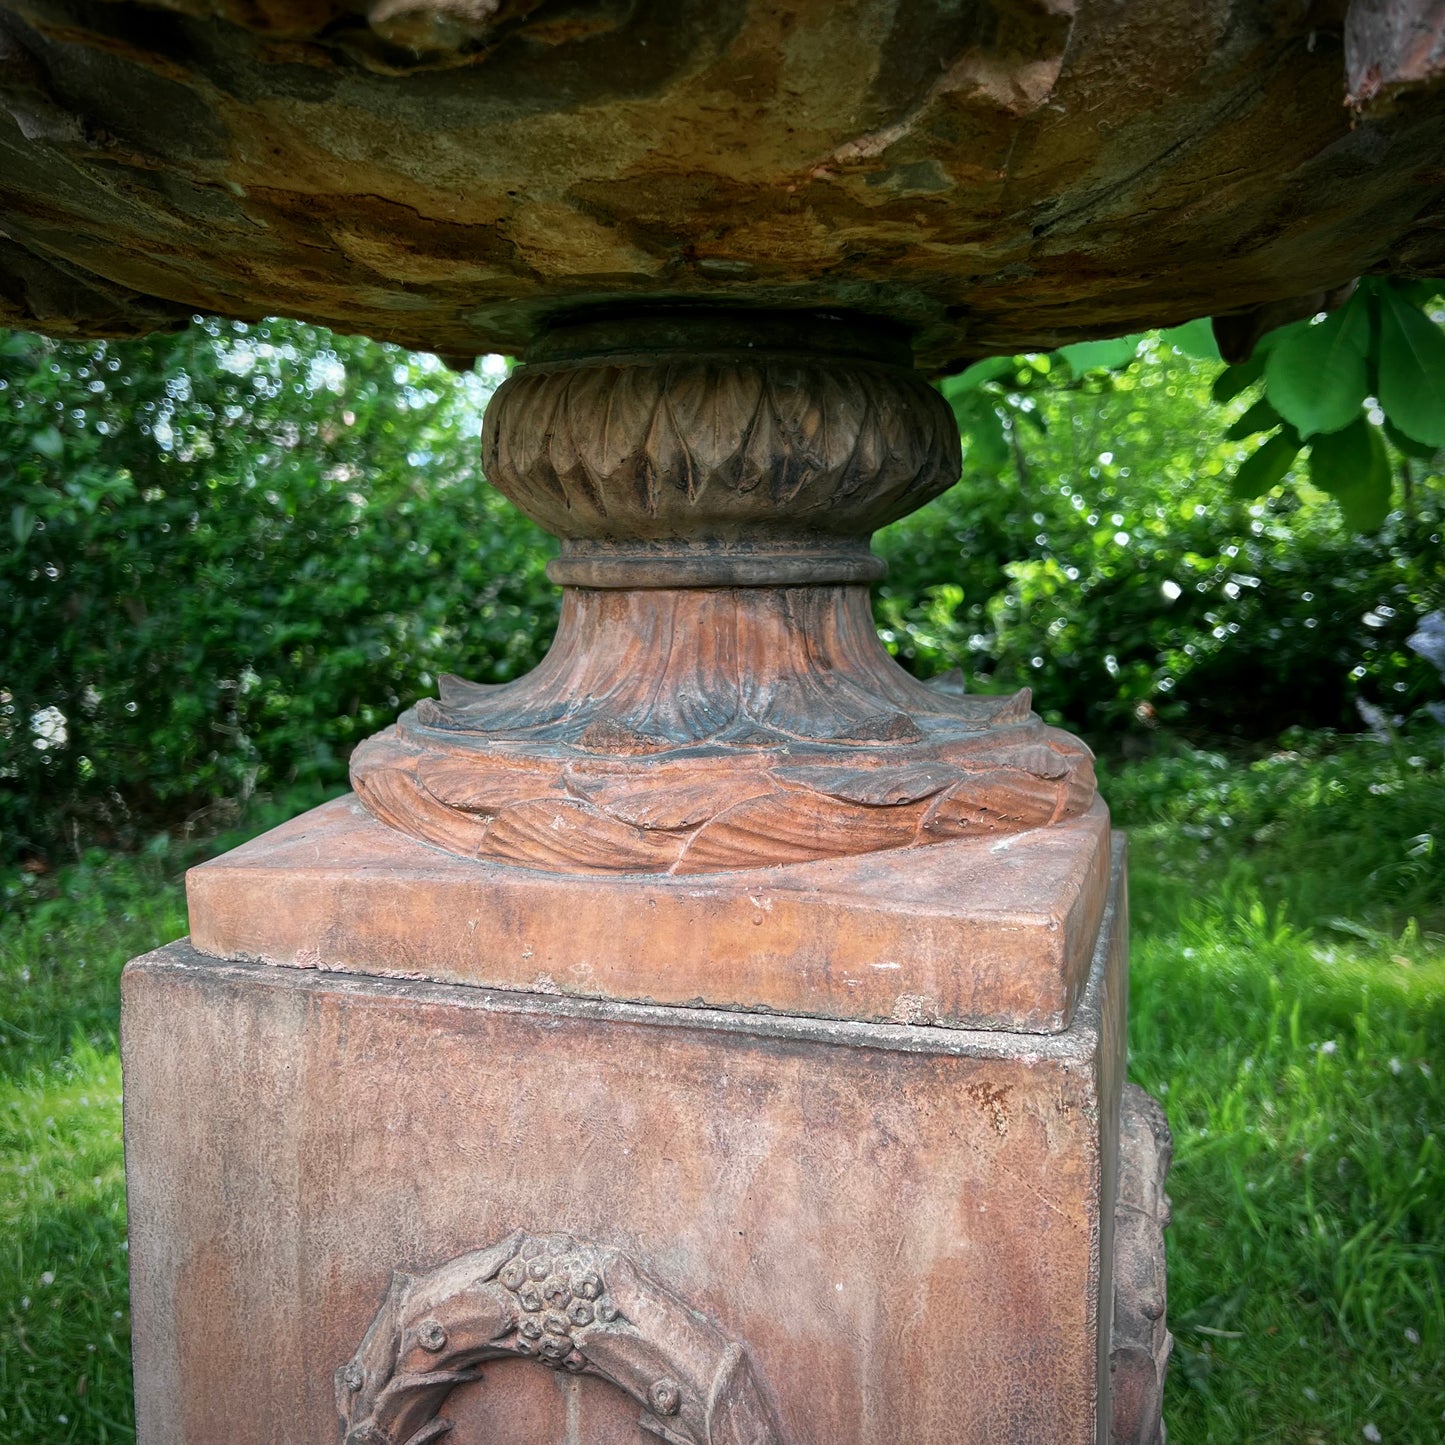 An Italian Neoclassical Style Terracotta Centrepiece Urn with Plinth